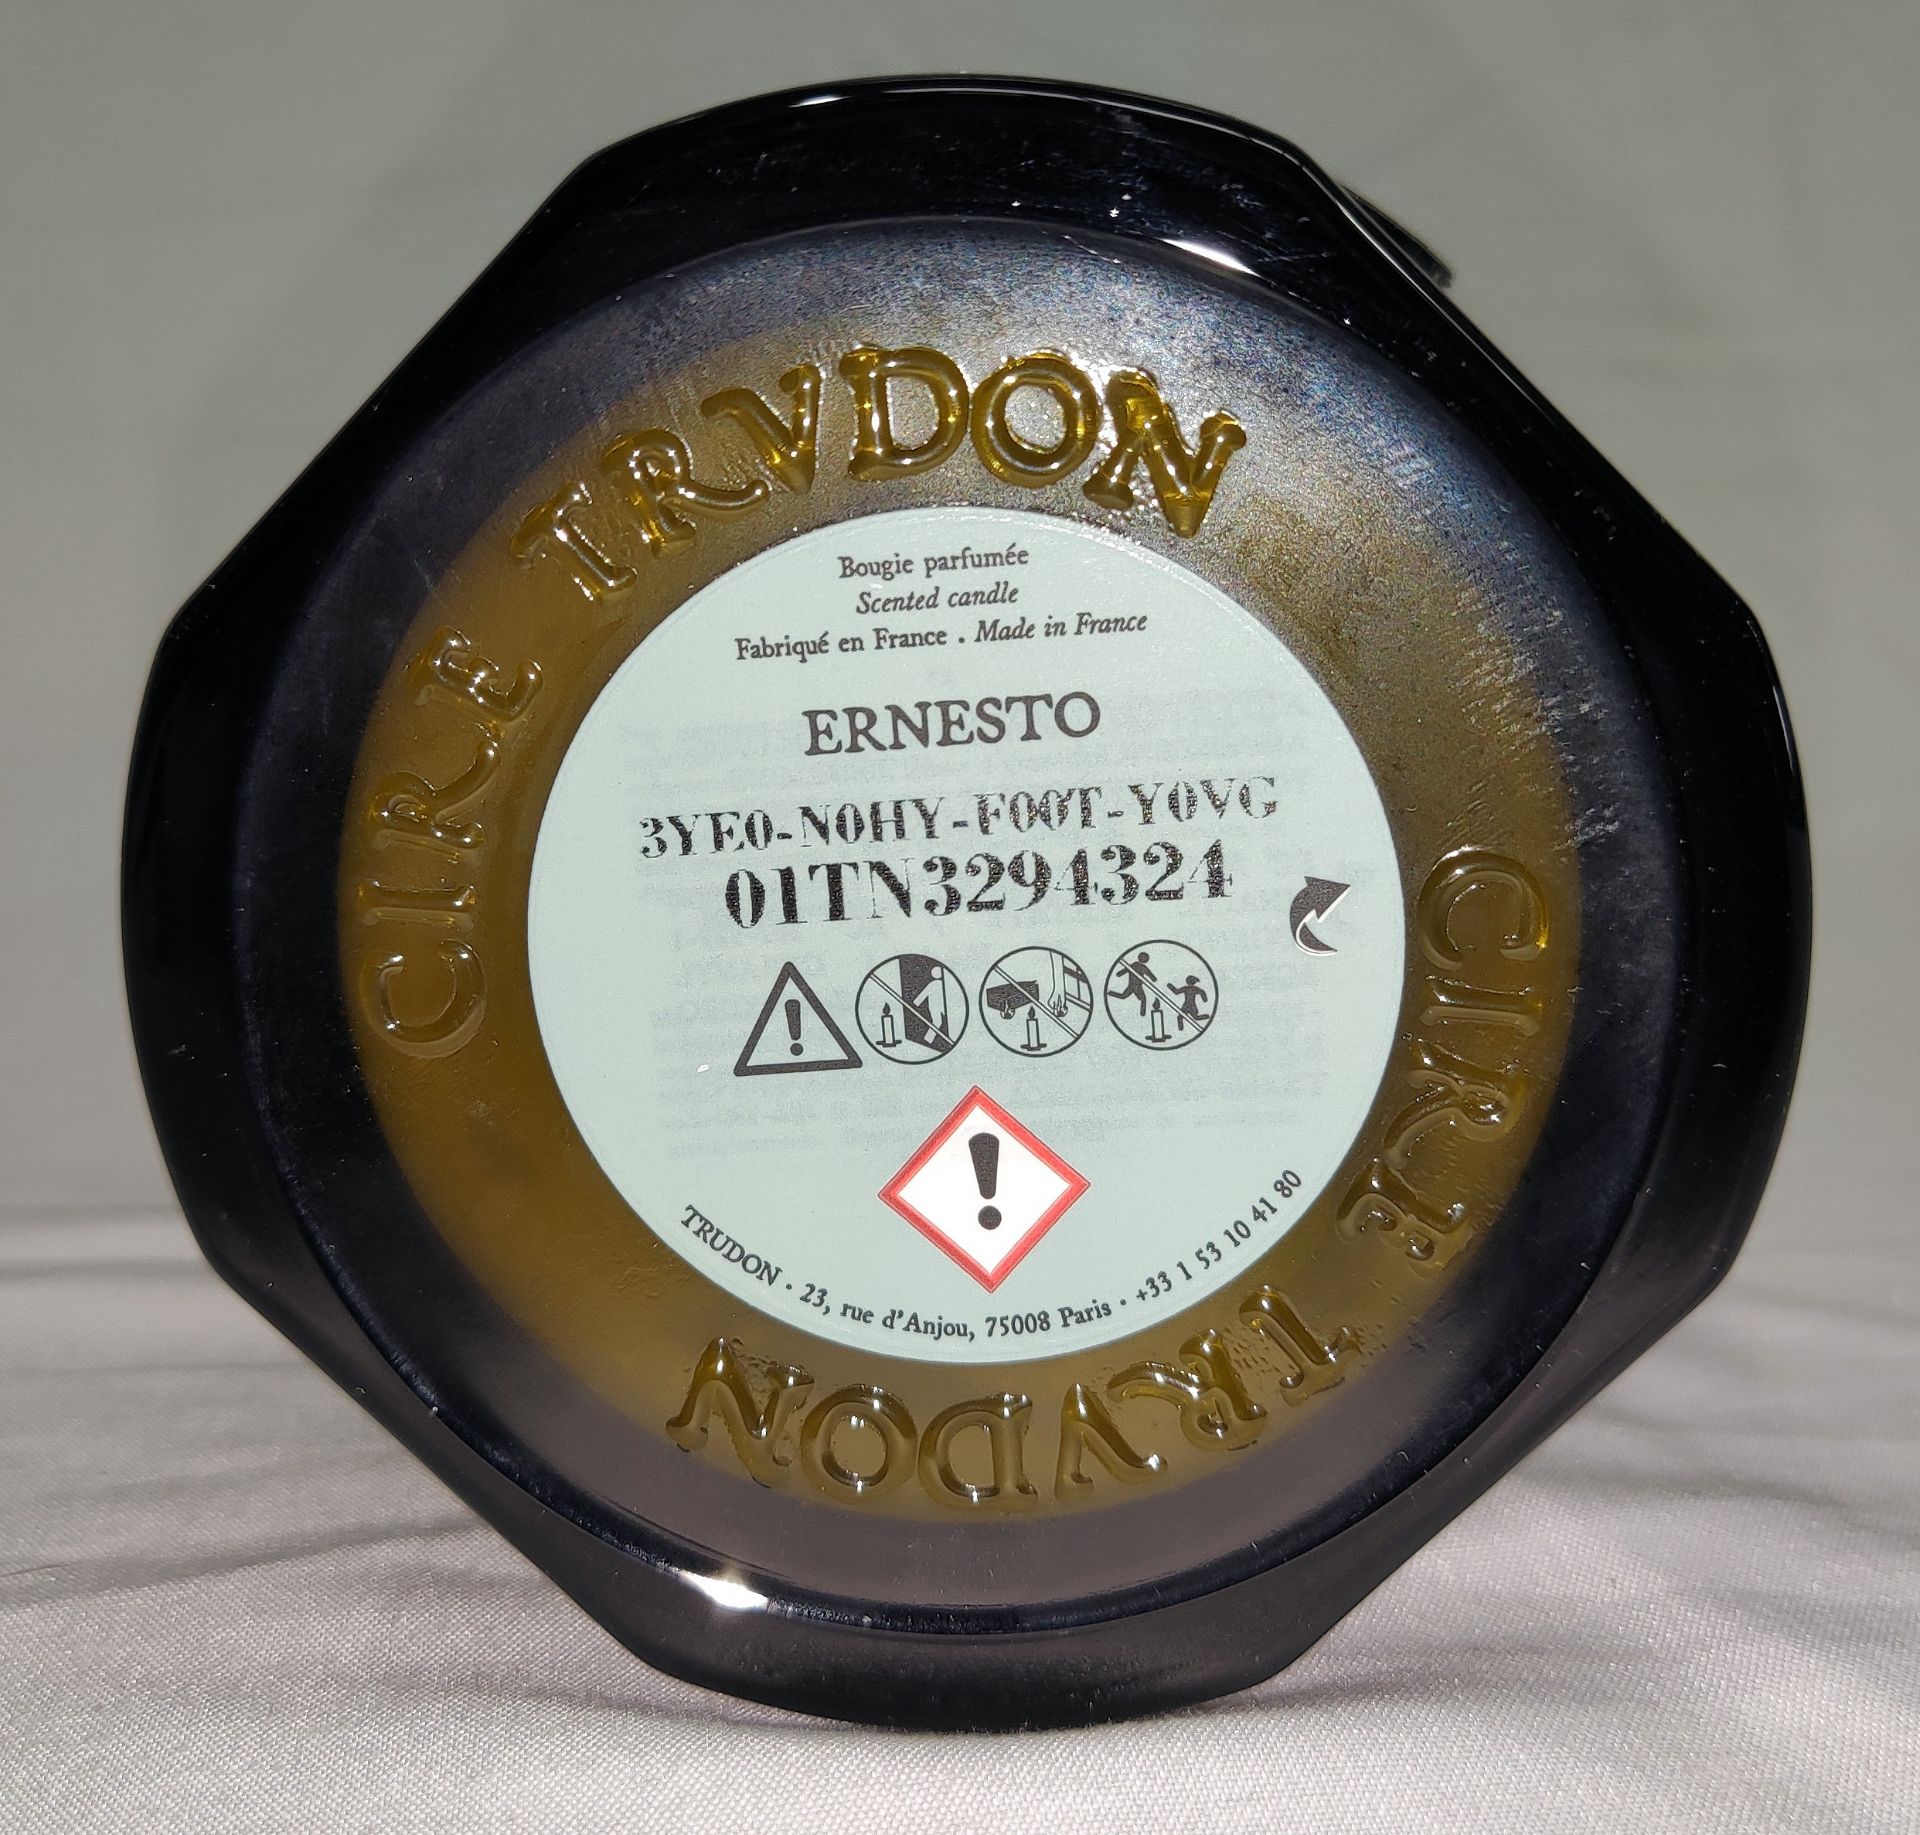 1 x TRUDON Ernesto 270G Candle - New/Boxed - Original RRP £90 - Ref: 2559342/HJL441/C28/07-23 - - Image 11 of 19